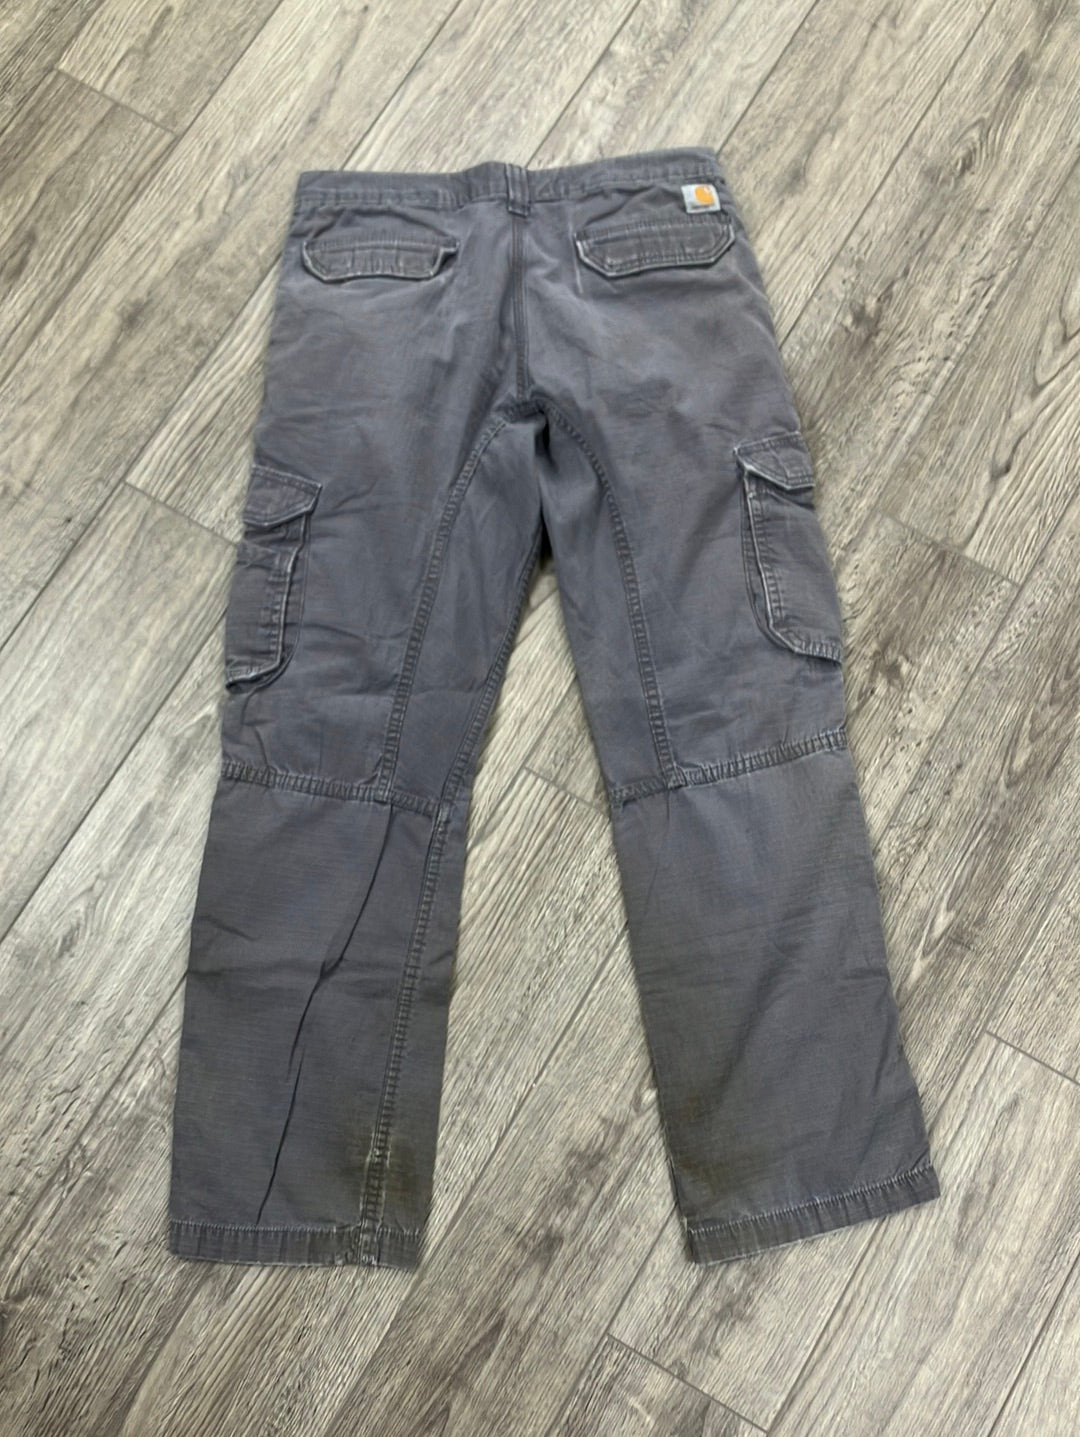 Carhartt Relaxed Fit Grey Cargo Pants Size 31x32